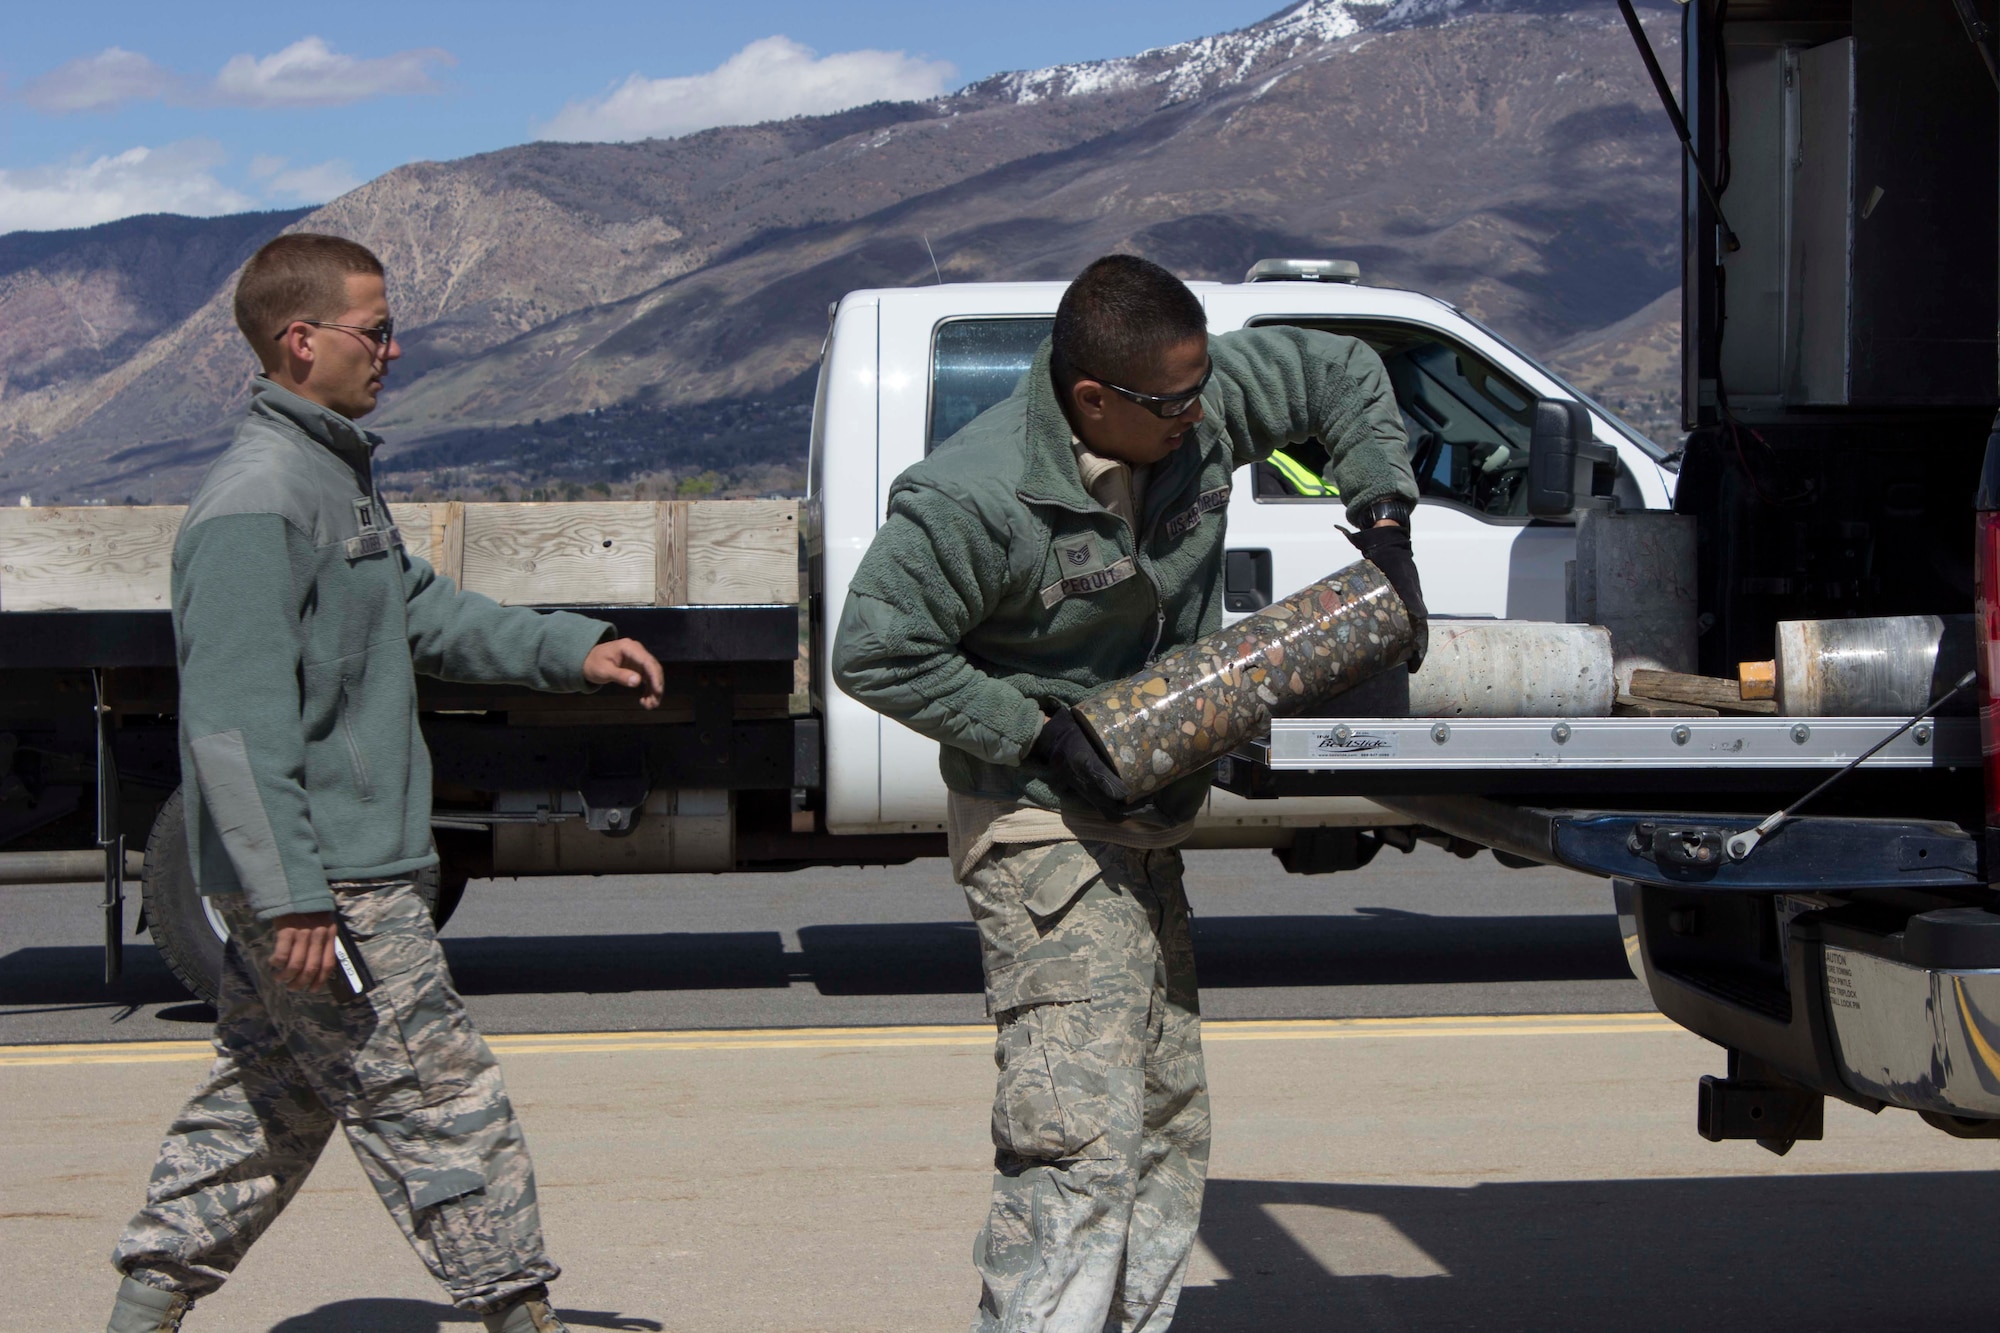 Capt. Andrew Jouben, chief of the Air Force Civil Engineer Center Airfield Pavement Evaluation, or APE, Team, and Tech. Sgt. Allin Pequit, APE Team technician, collect core samples taken from Hill AFB, Utah, during a recent airfield pavement evaluation.